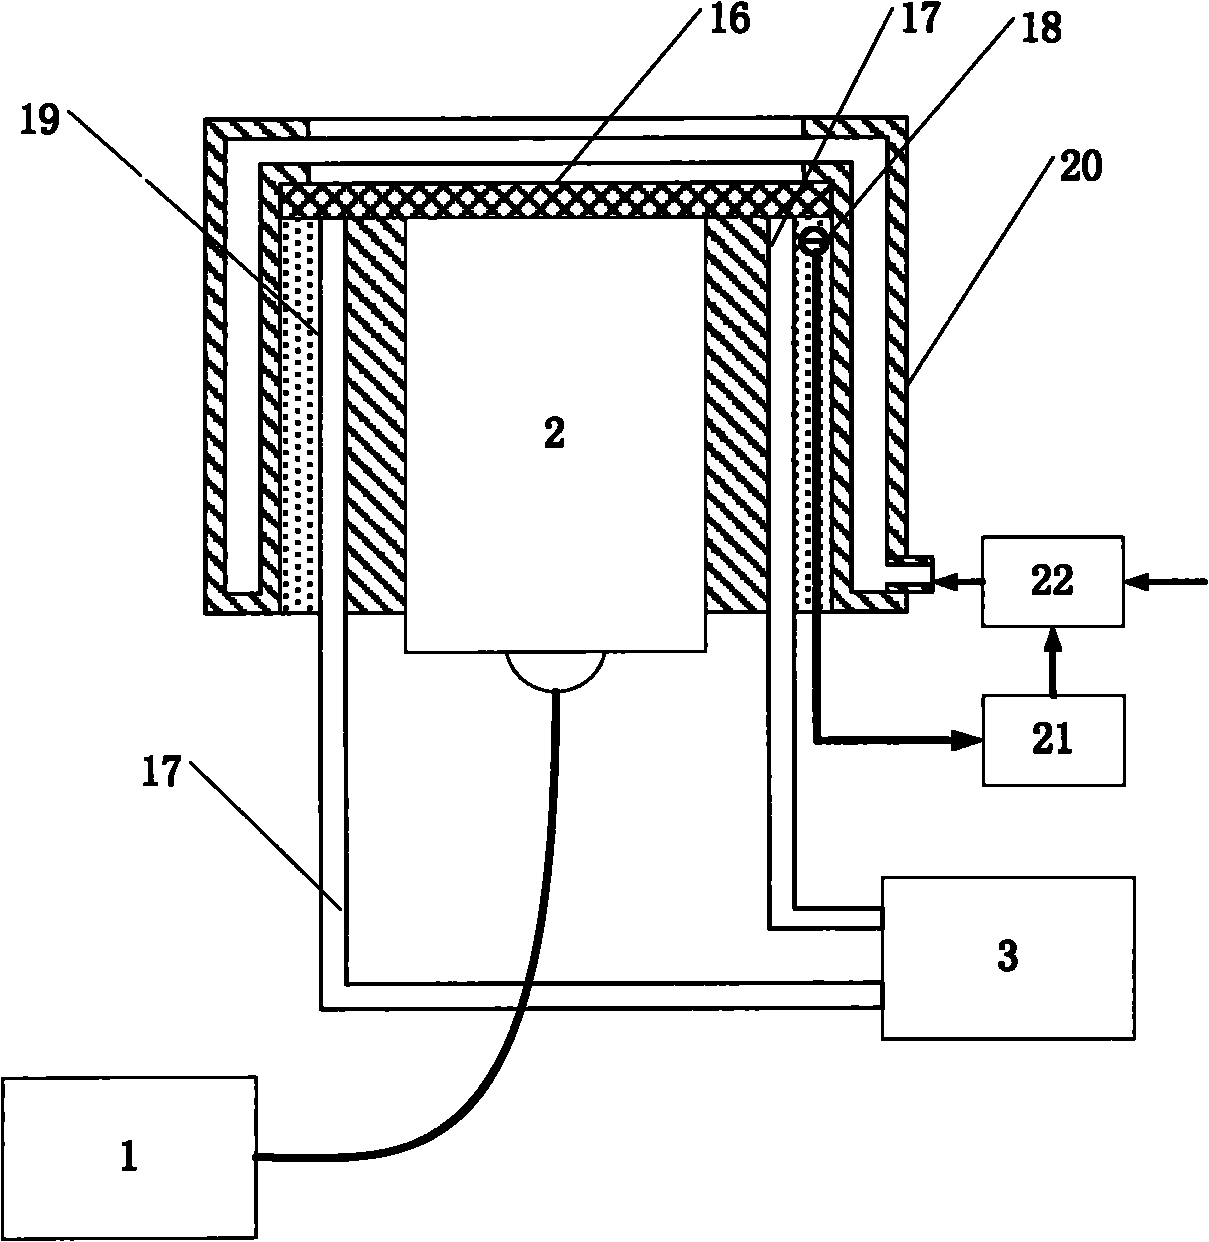 Rotating body surface non-contact icing detector